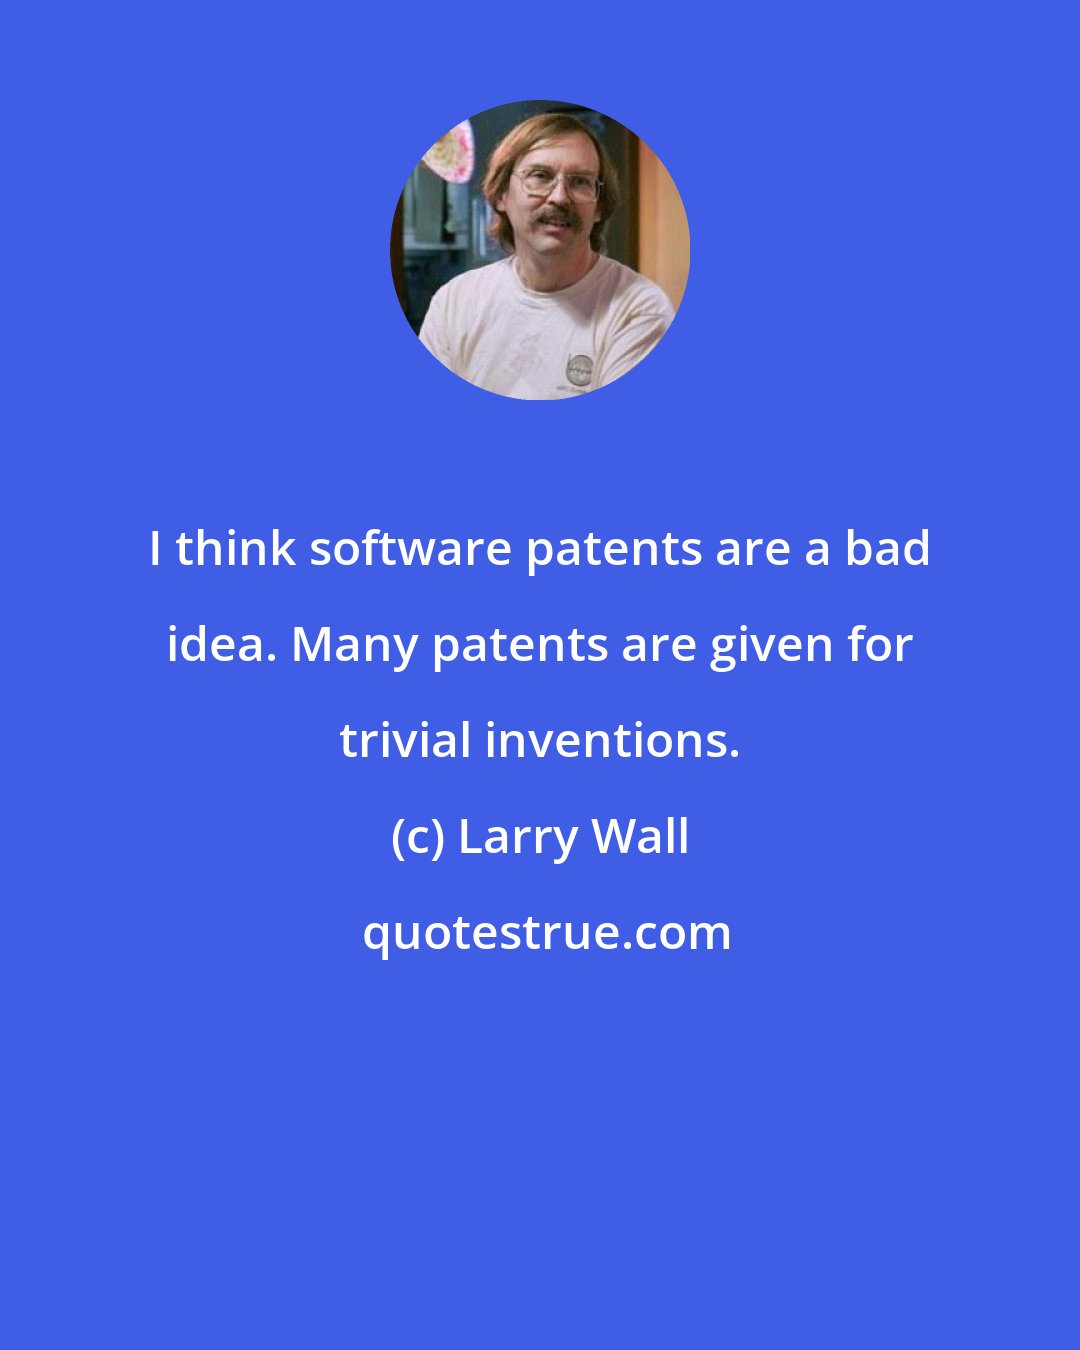 Larry Wall: I think software patents are a bad idea. Many patents are given for trivial inventions.